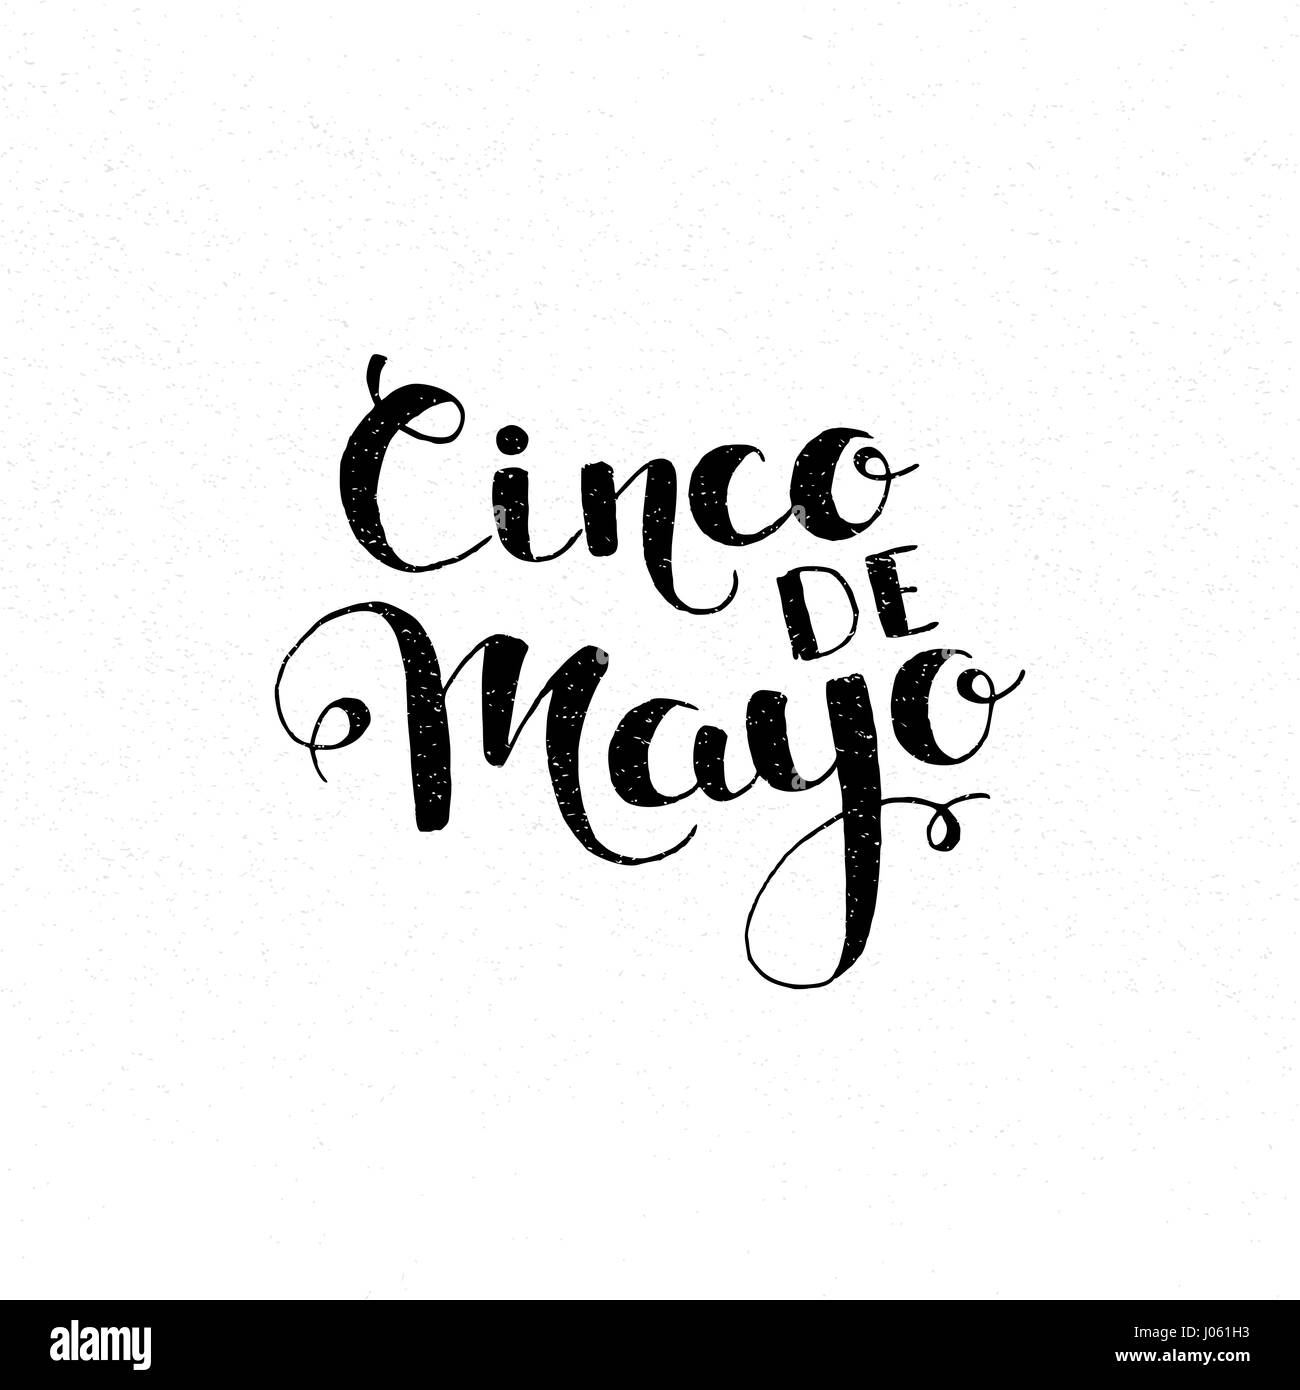 Cinco de Mayo handwritten lettering. Modern vector hand drawn calligraphy with grunge overlay texture over white background Stock Vector